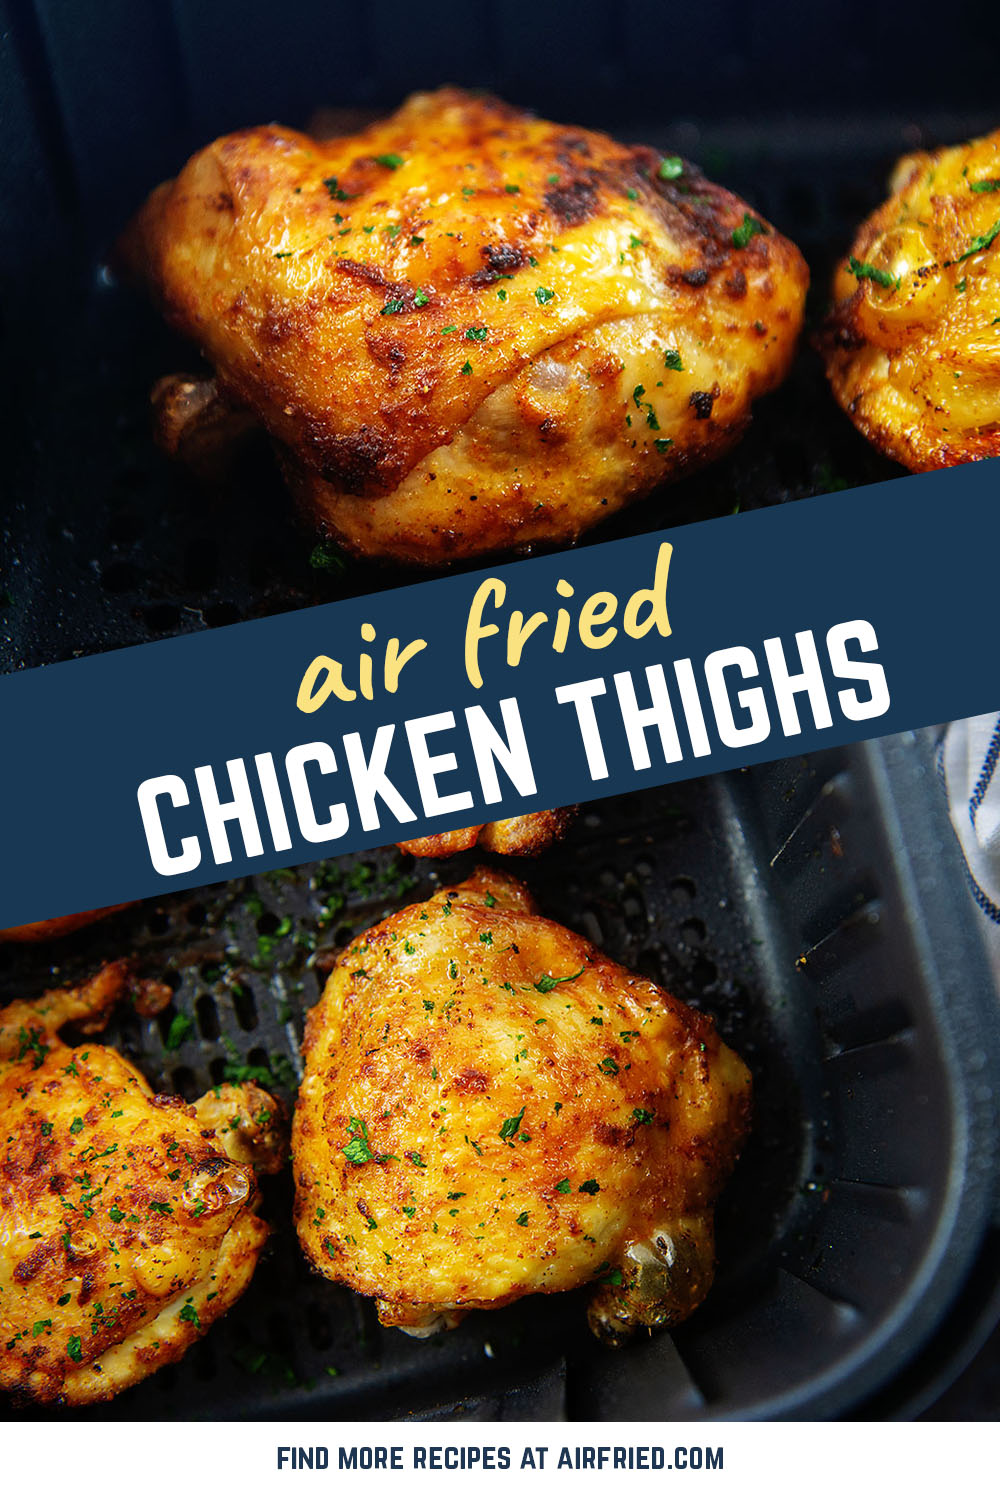 Try our air fryer recipe for chicken thighs that are tender on the inside and have a great well seasoned skin on the outside!